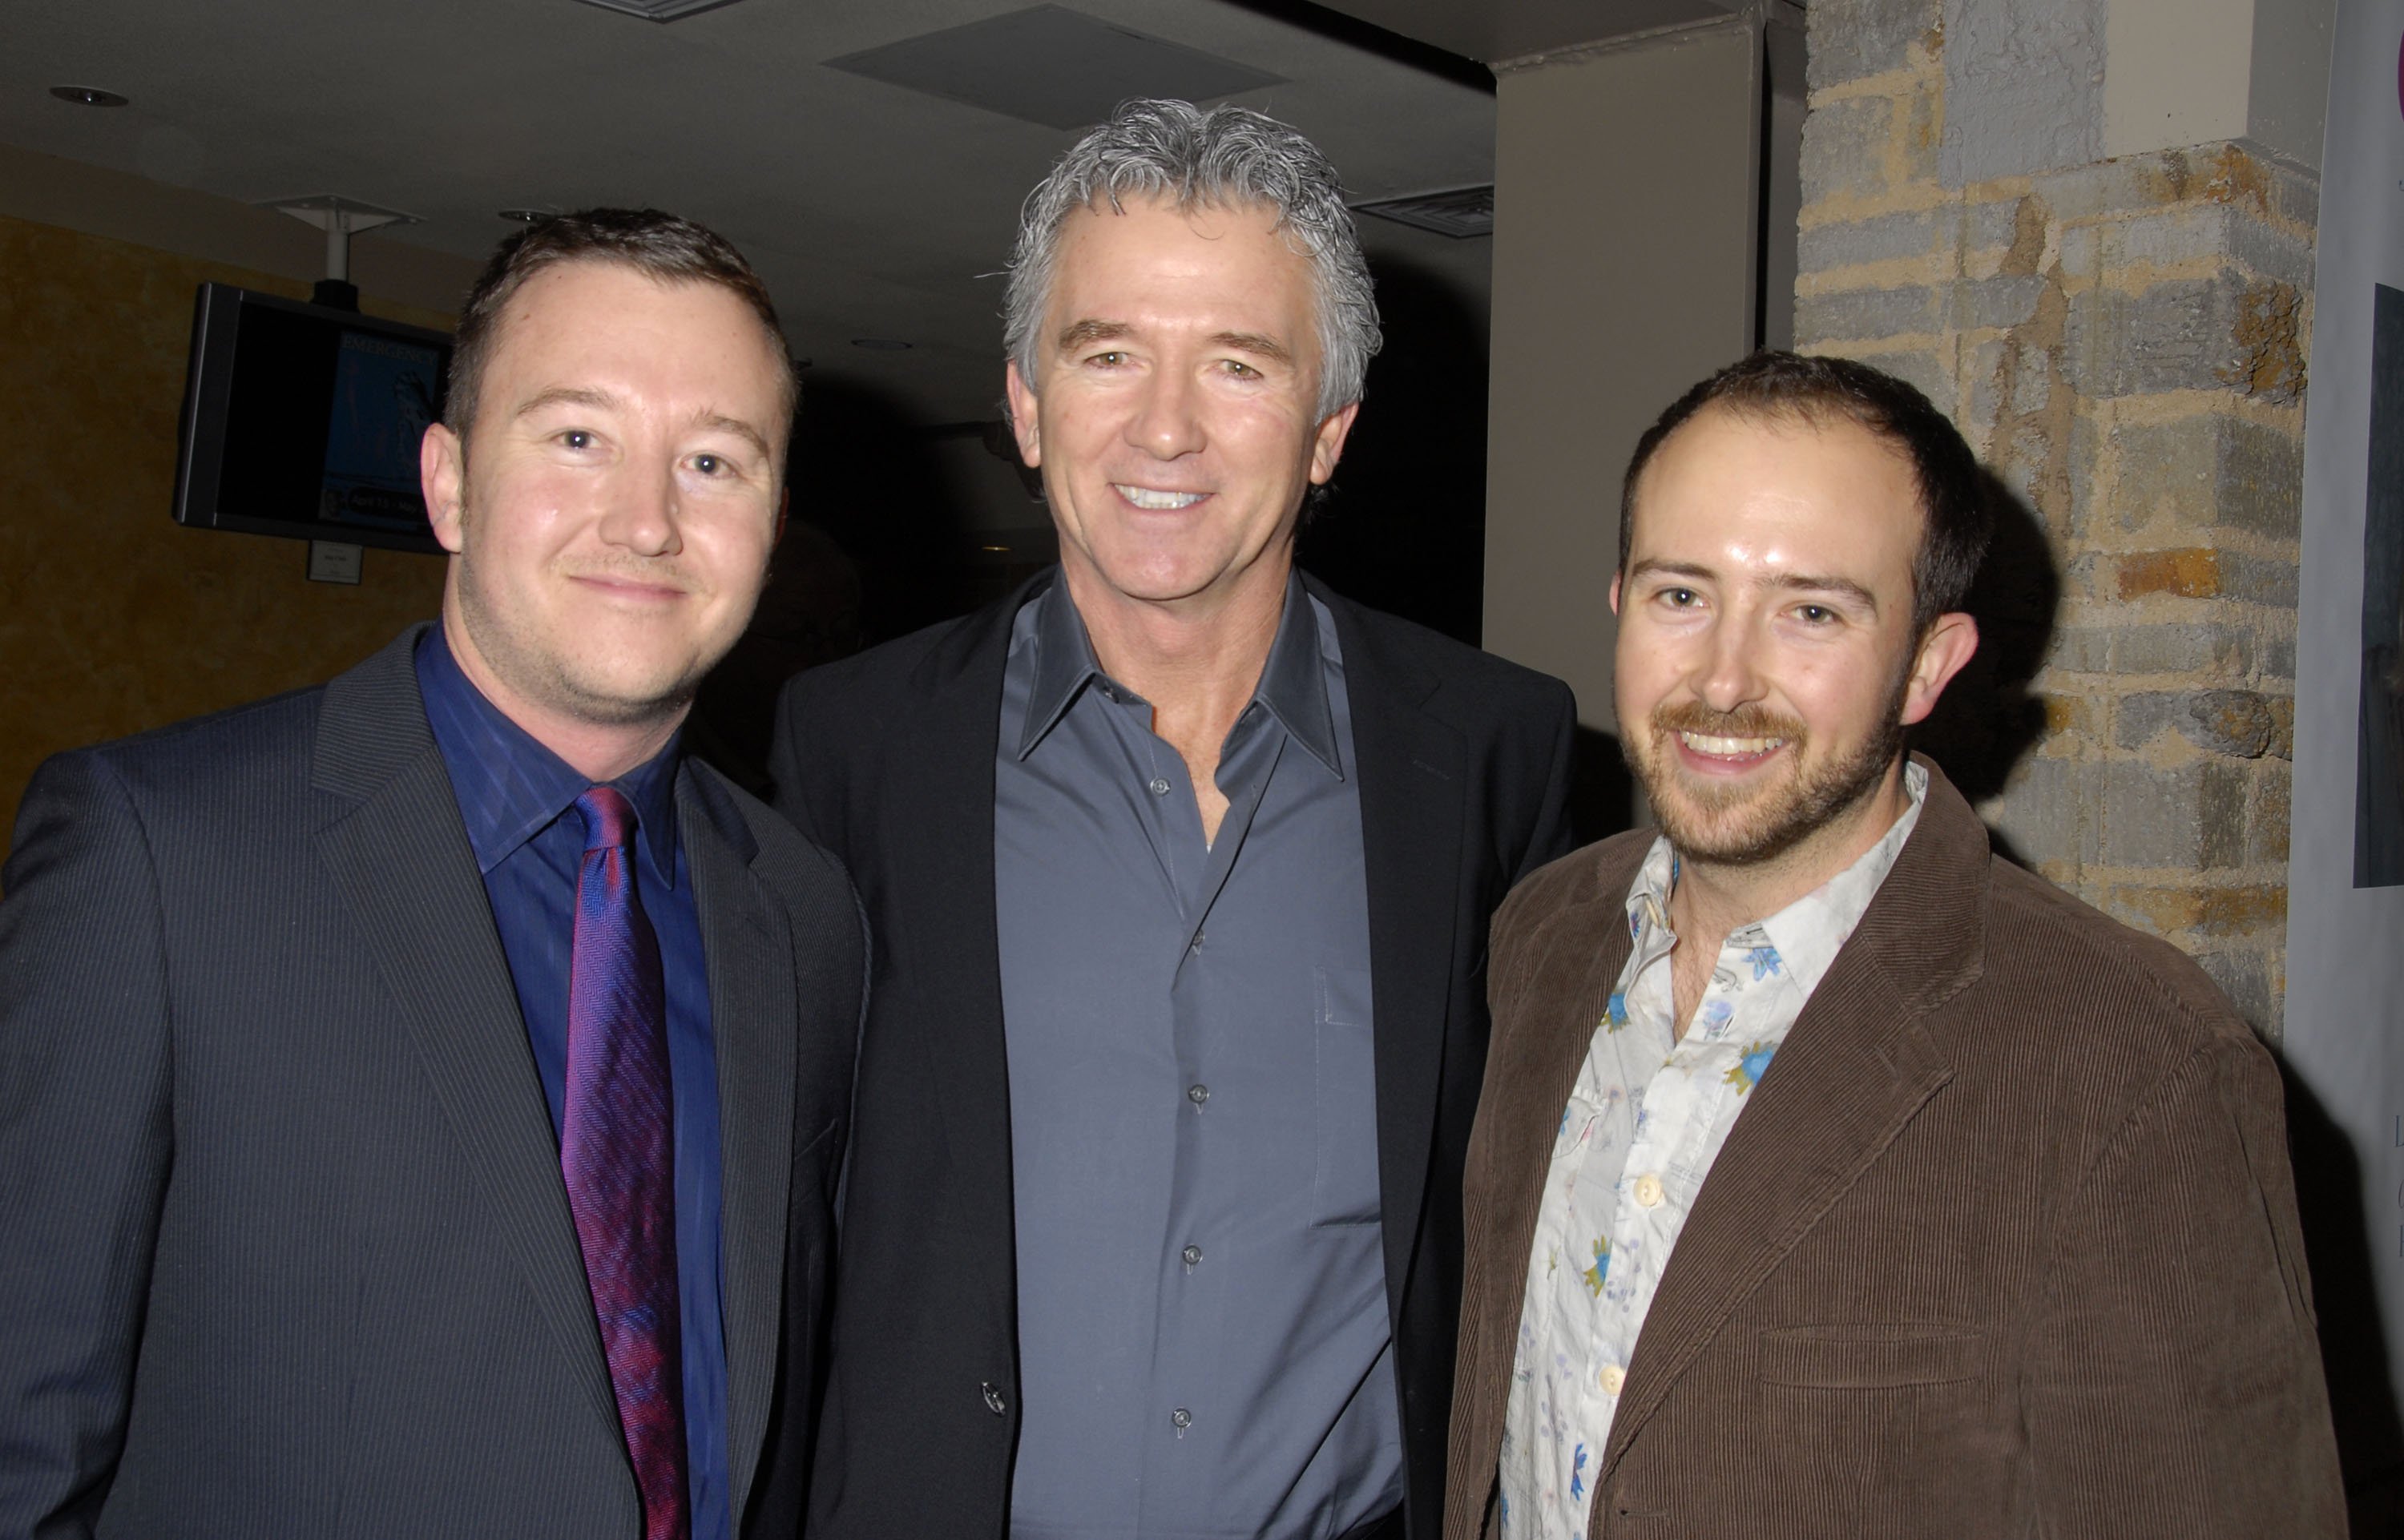 Actor Patrick Duffy and his sons Padriac Duffy and Conor Duffy at the opening night of Joan Rivers: A Work in Progress By A Life in Progress which took place at the Geffen Playhouse on February 13, 2008 in Los Angeles, California. | Source: Getty Images